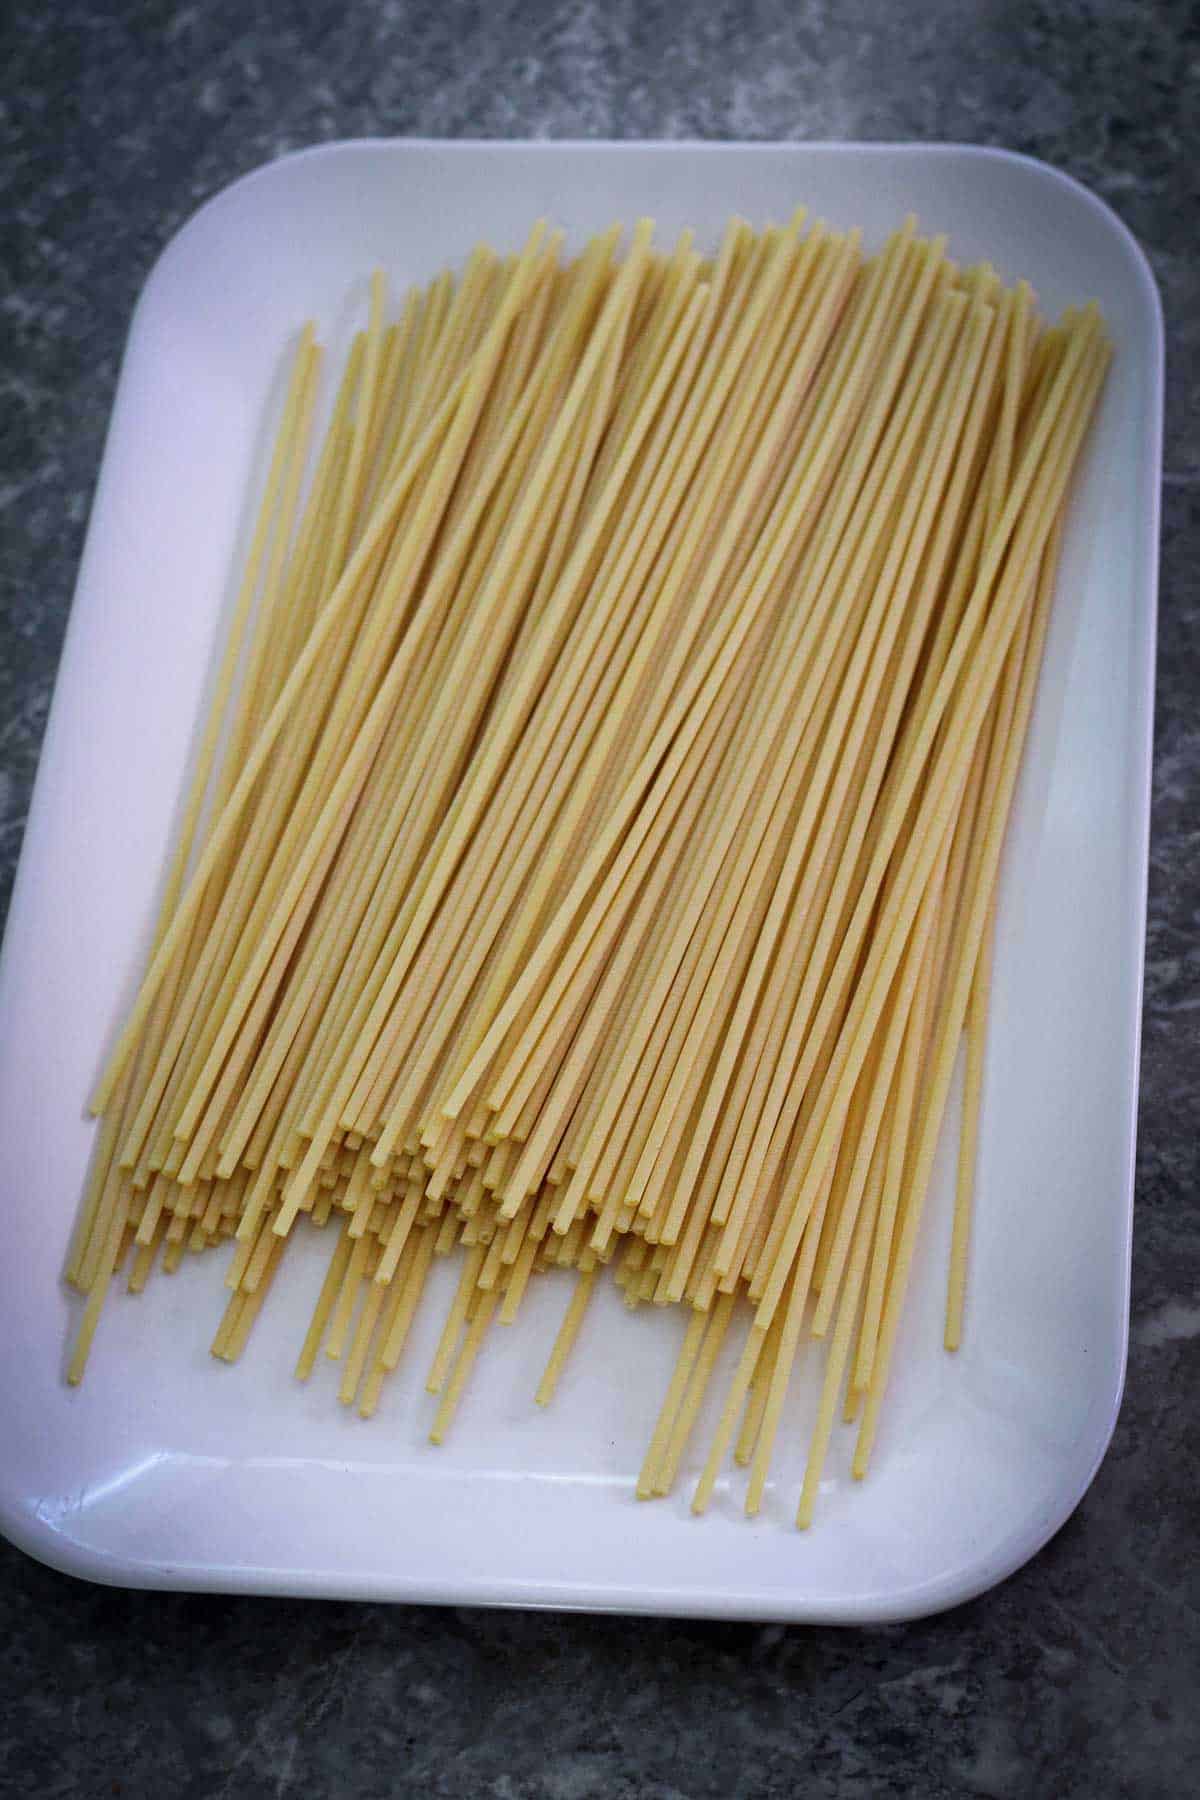 Uncooked bucatini in a rectangular platter. 